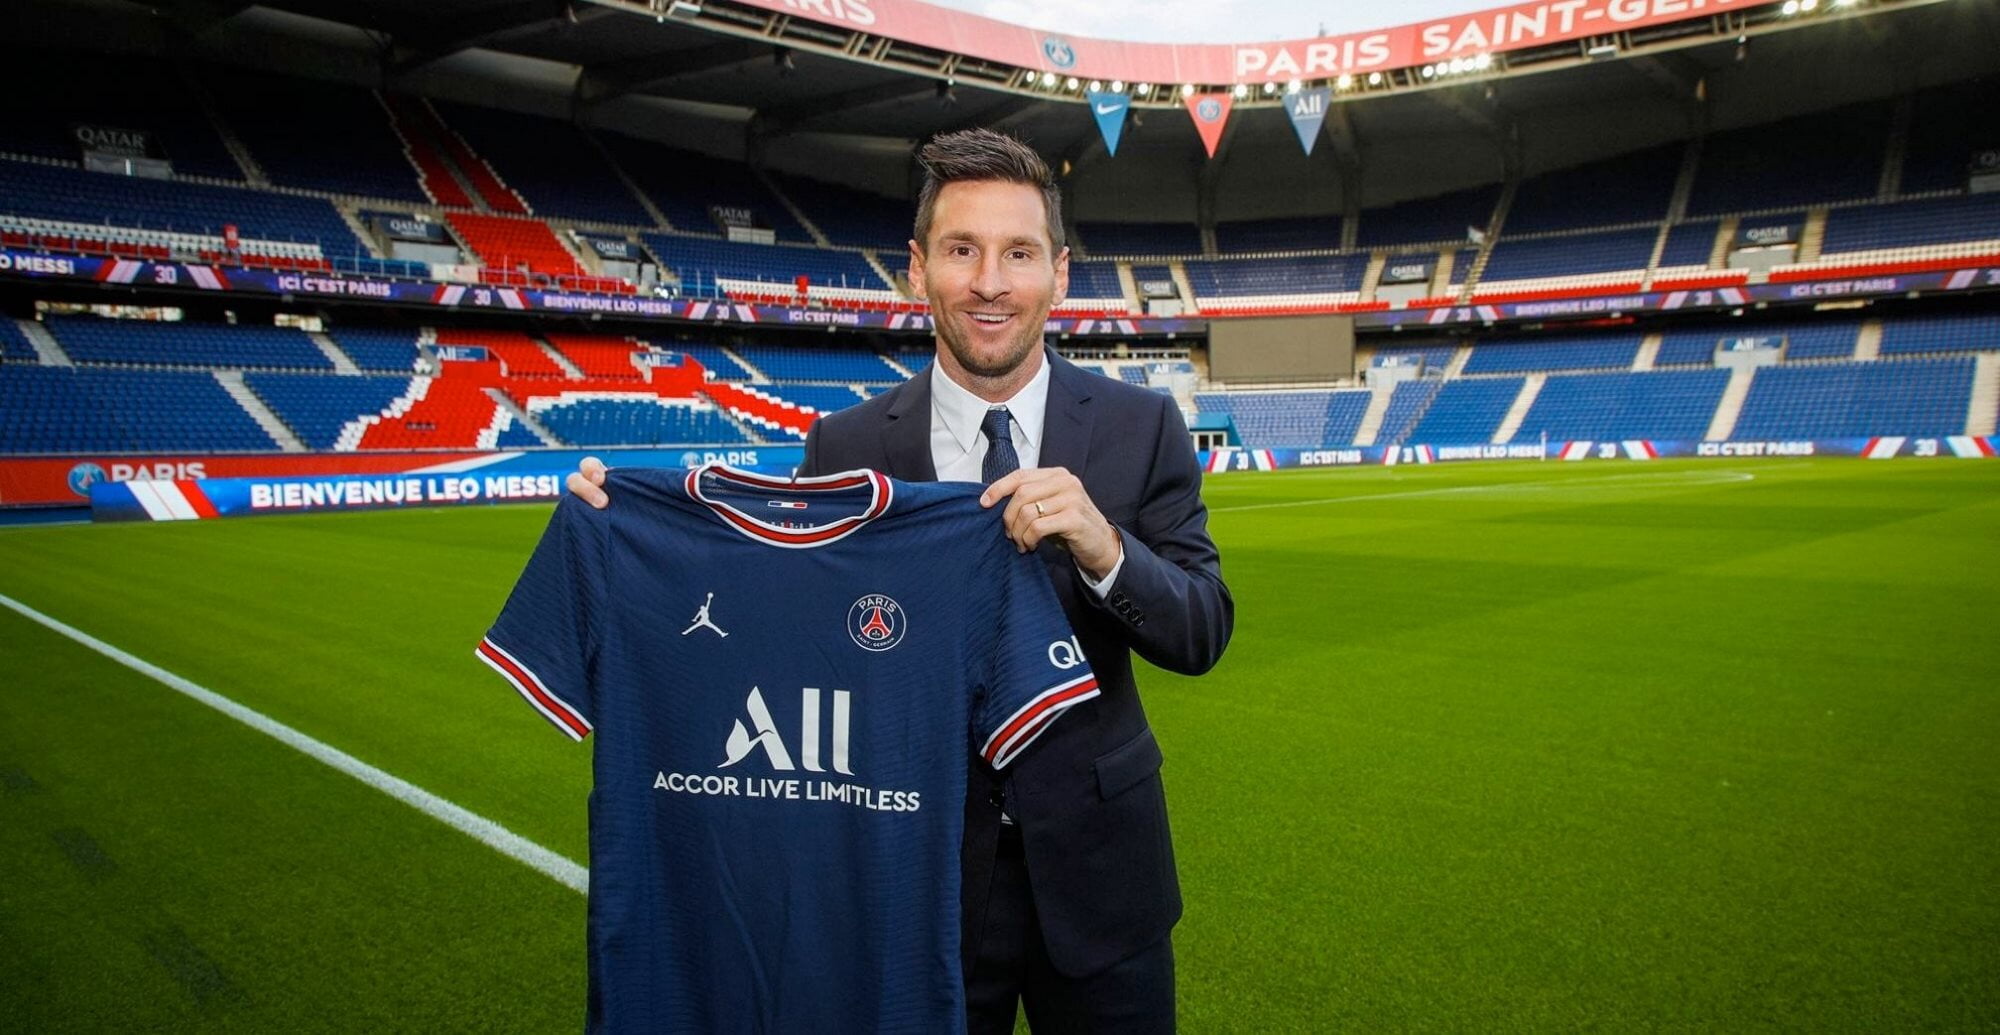 Lionel Messi Signs For Psg